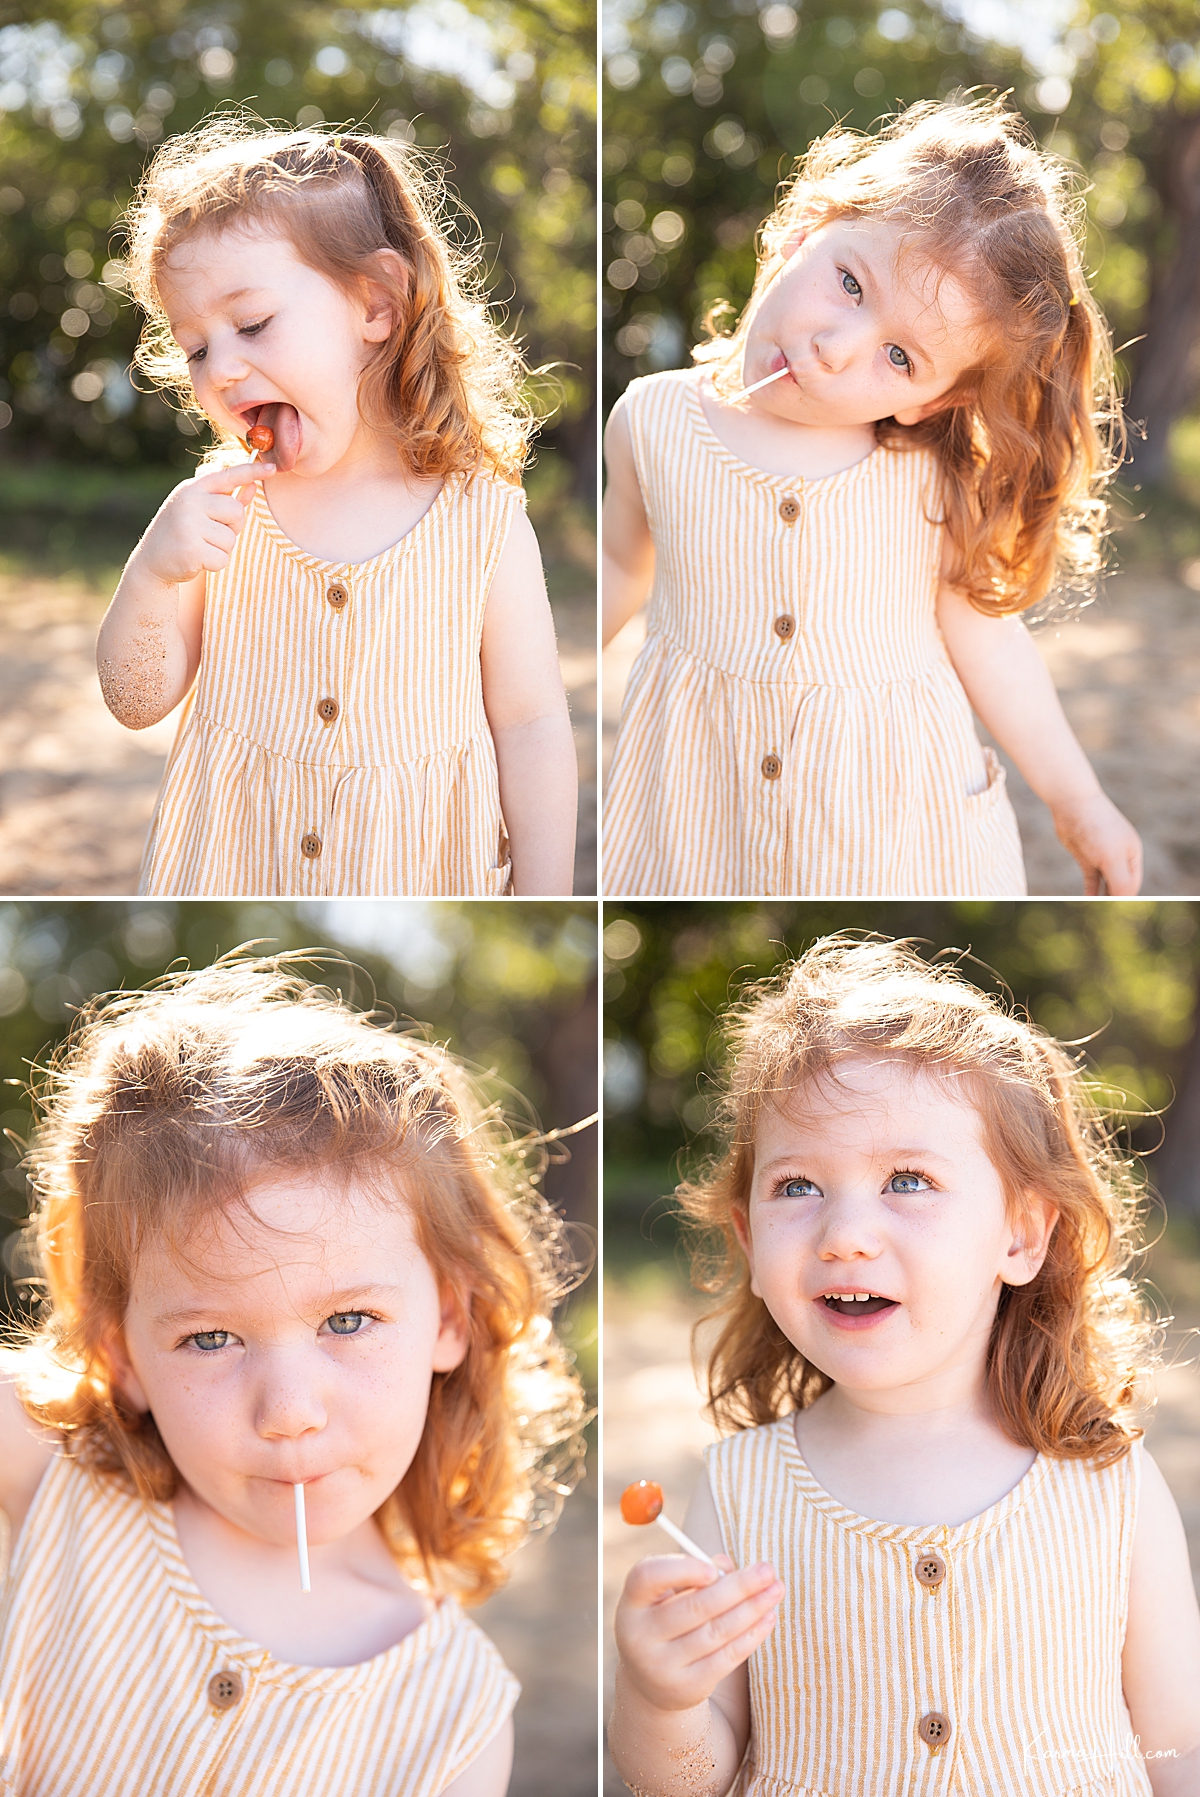 cute photos of a little girl with red hair in a yellow striped dress eating a lollipop on the beach 